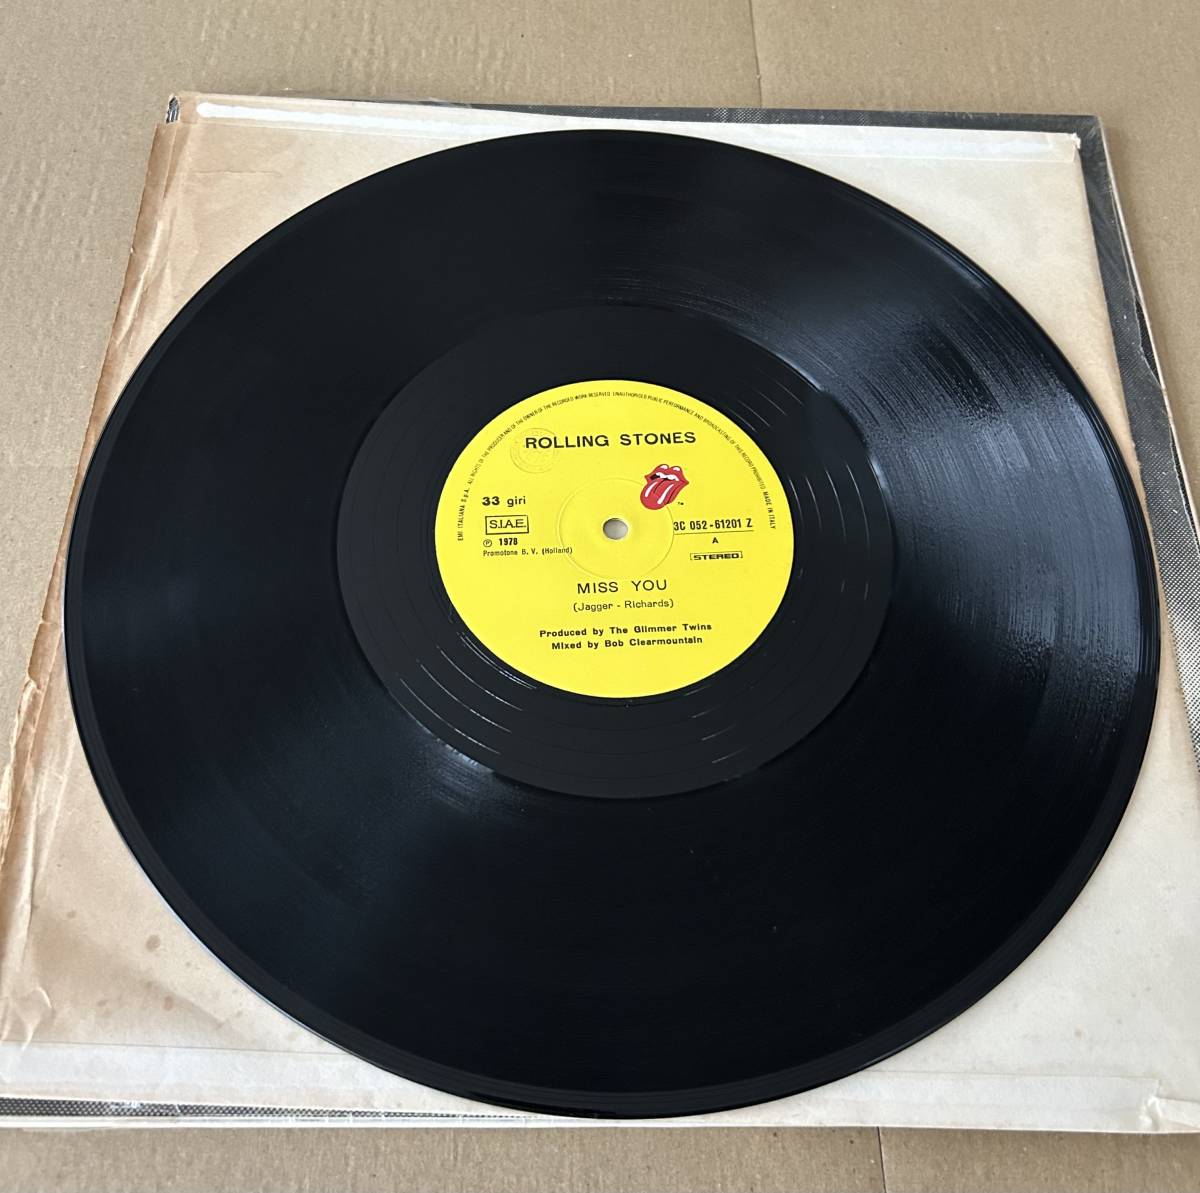 The Rolling Stones Miss You (12inch) (Rolling Stones Records 3C 052-61201 Z) Italy シュリンク_画像4